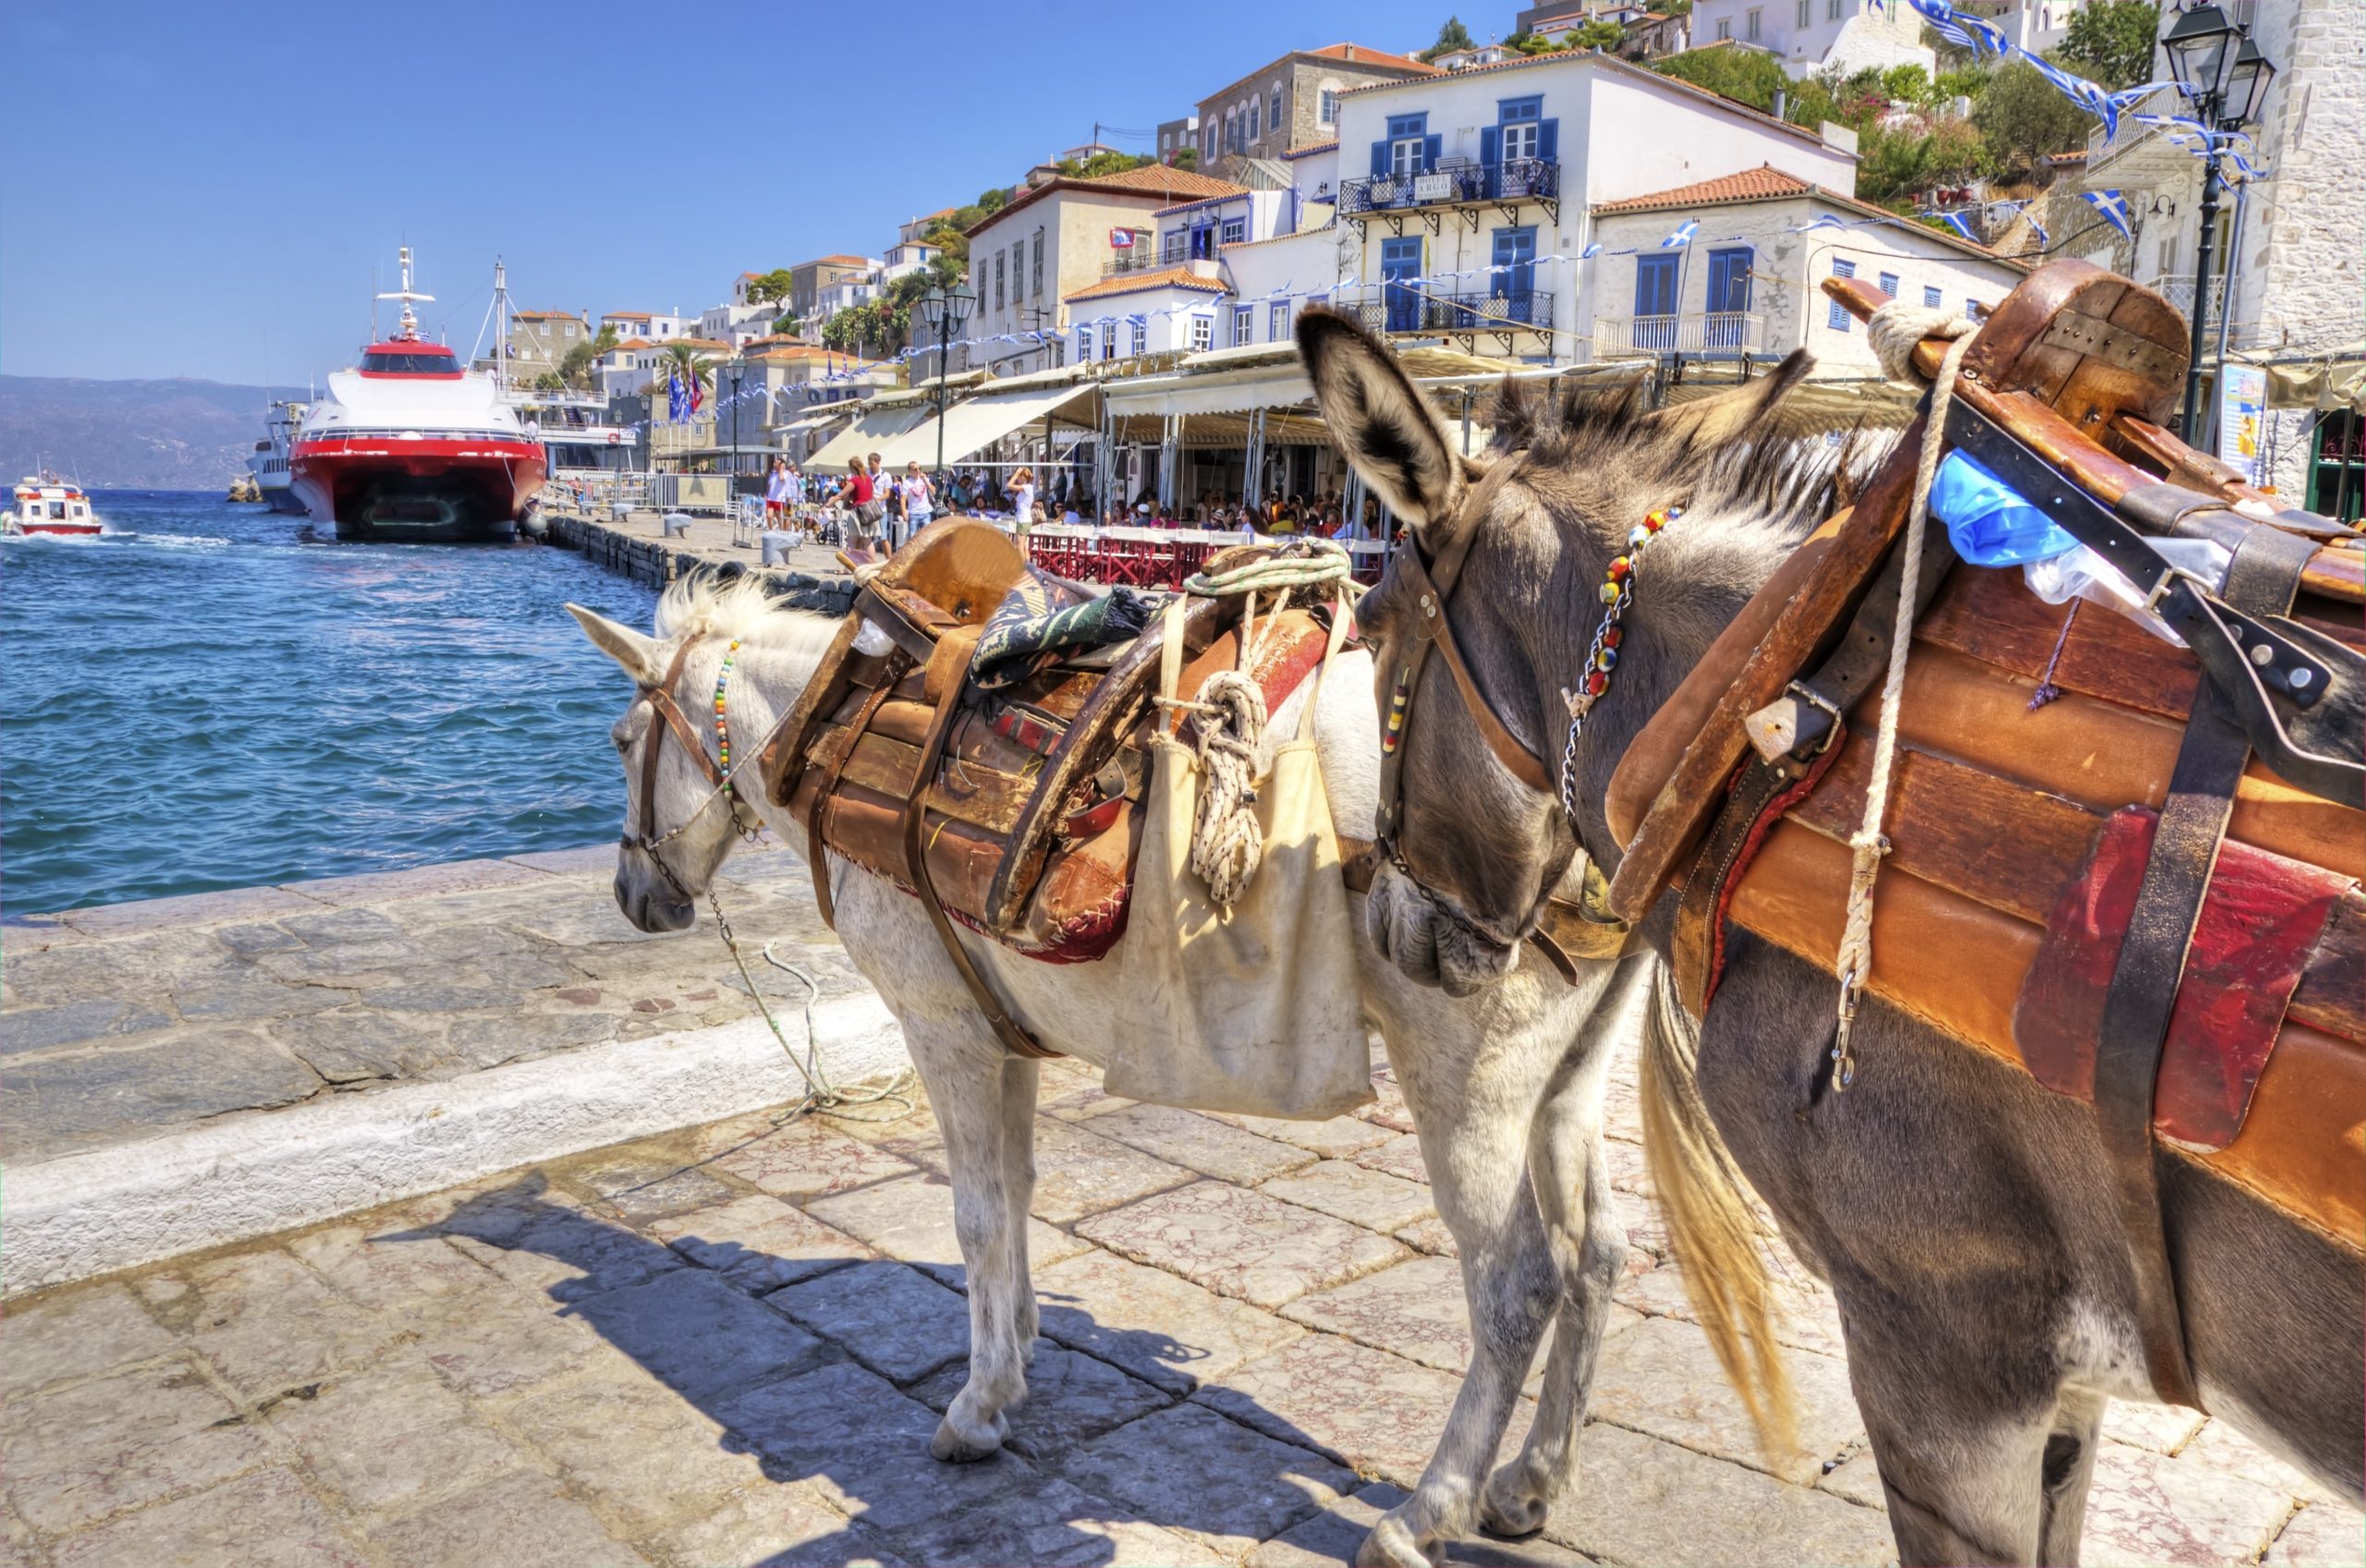 Explore The Island Of Hydra On The Aegina, Poros And Hydra Cruise From Athens